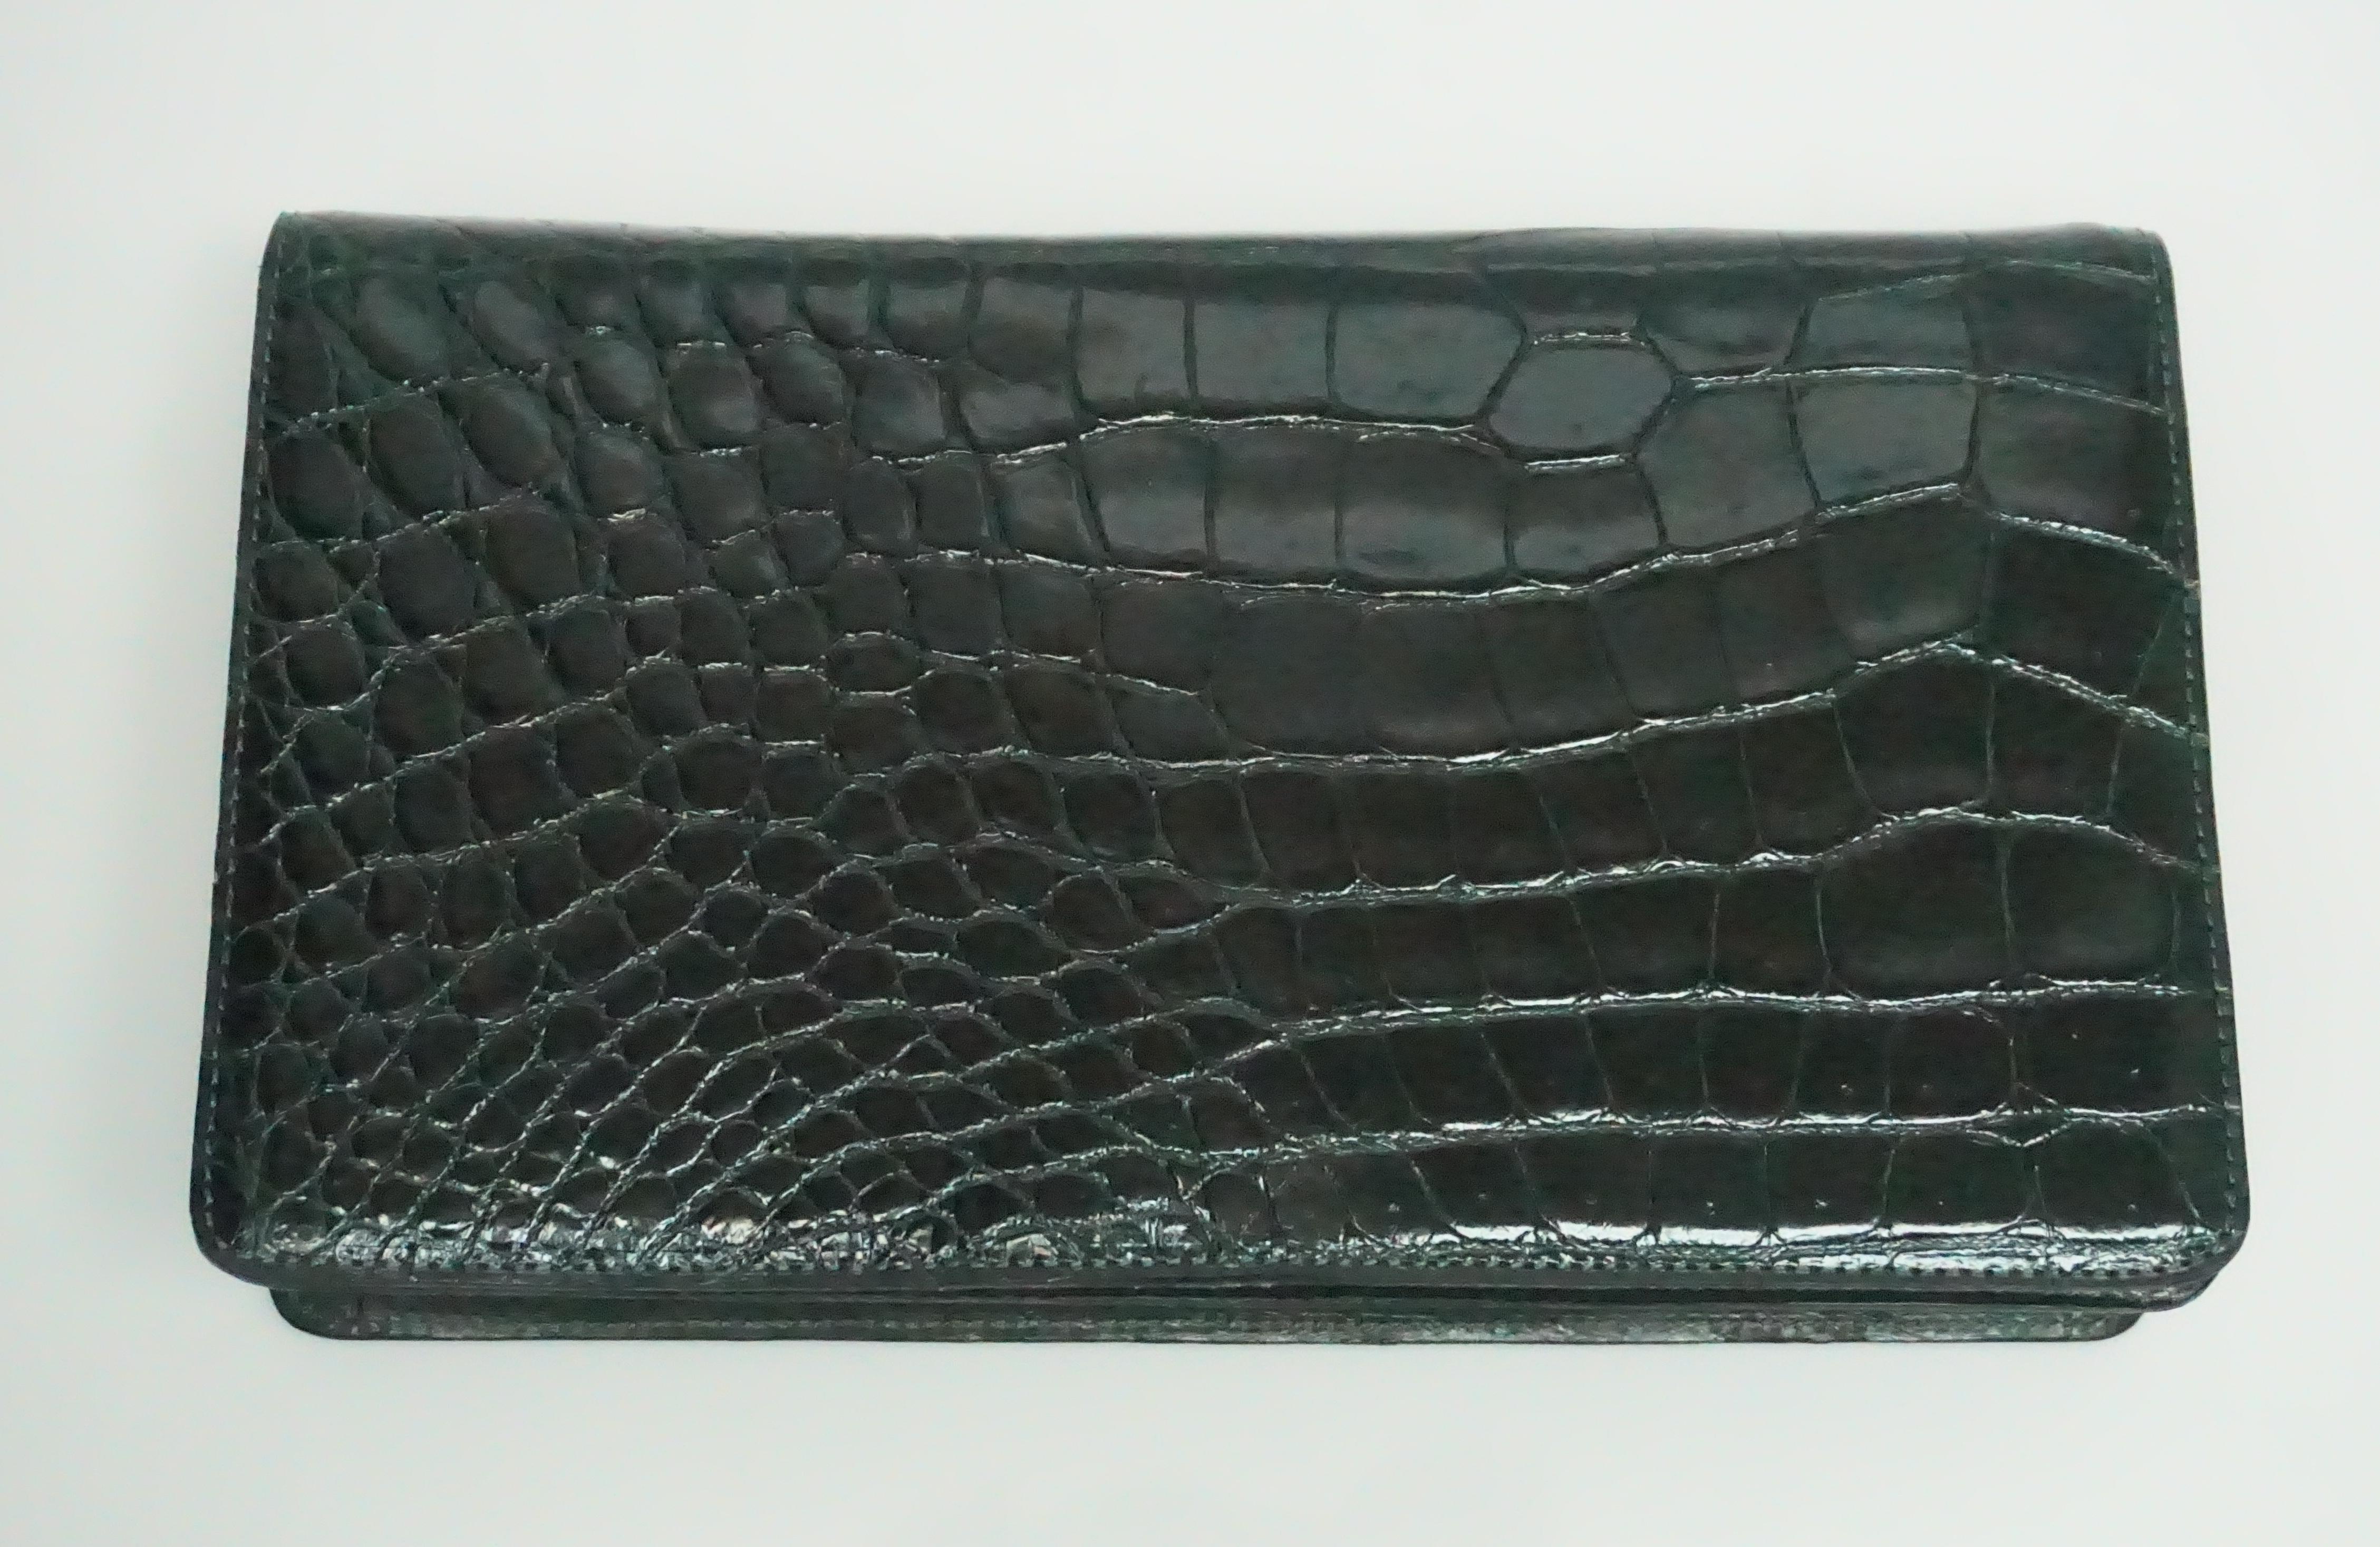 Saks Fifth Avenue Dark Green Alligator Clutch  This beautiful alligator clutch is in excellent condition. The flap that opens and closes the clutch is detailed with a magnetic button. The inside of the clutch has one side pocket that closes with a